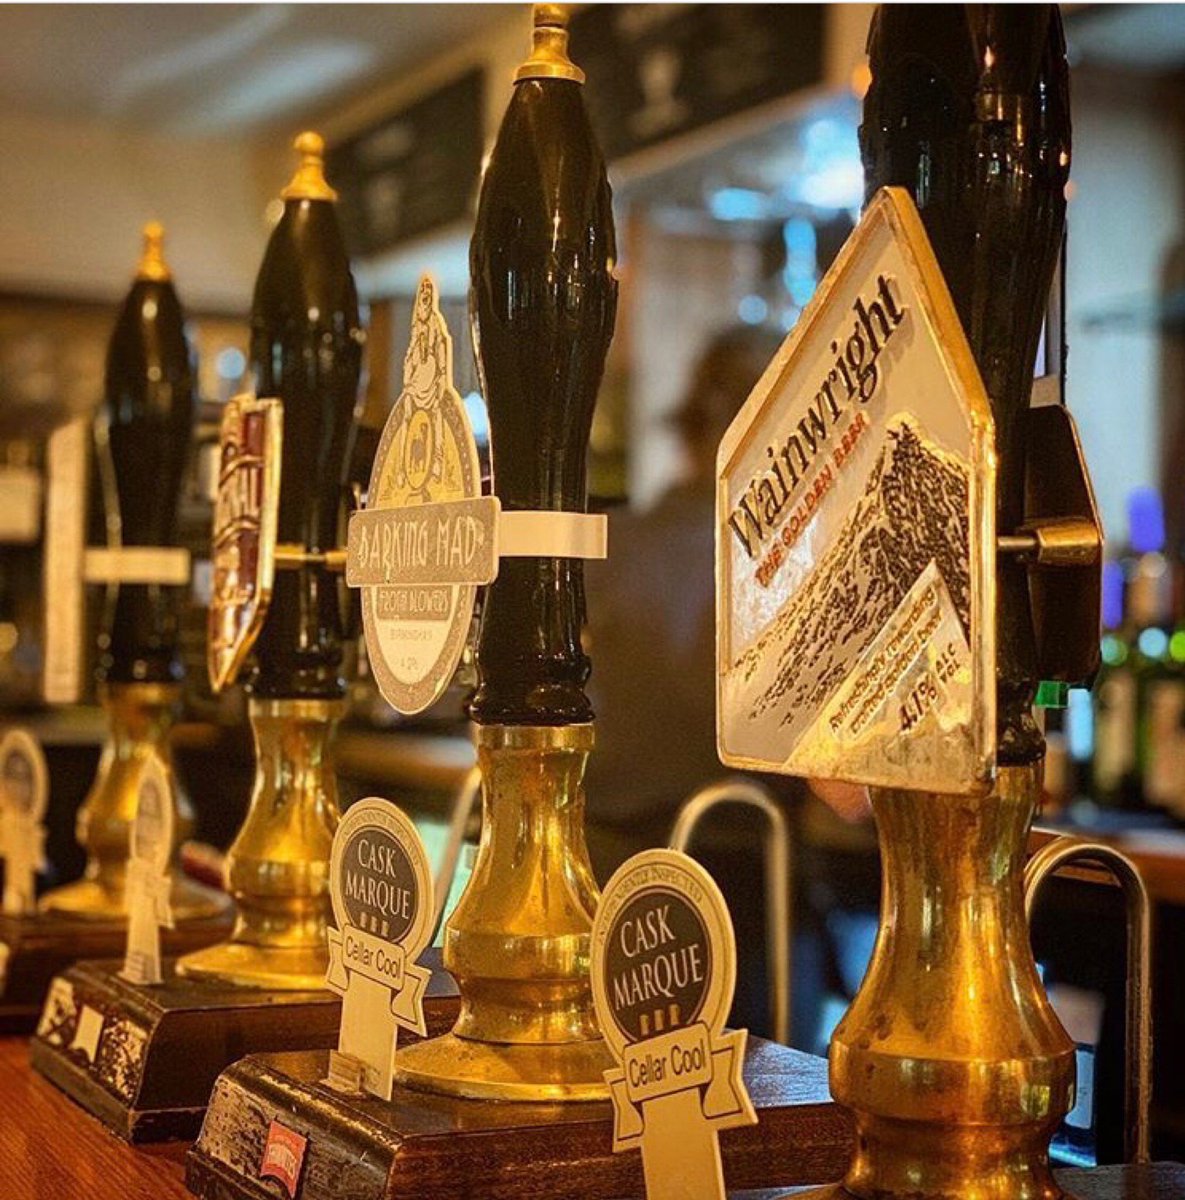 Our ales are what The Bulls Head prides itself on. During this beautiful bank holiday Monday how about you pop down for a chilled Wainwright which is packed full of sweet subtle notes and a delicate citrus aroma  #thebullshead #birminghamhour #ale #wainwright#mondaymotivation